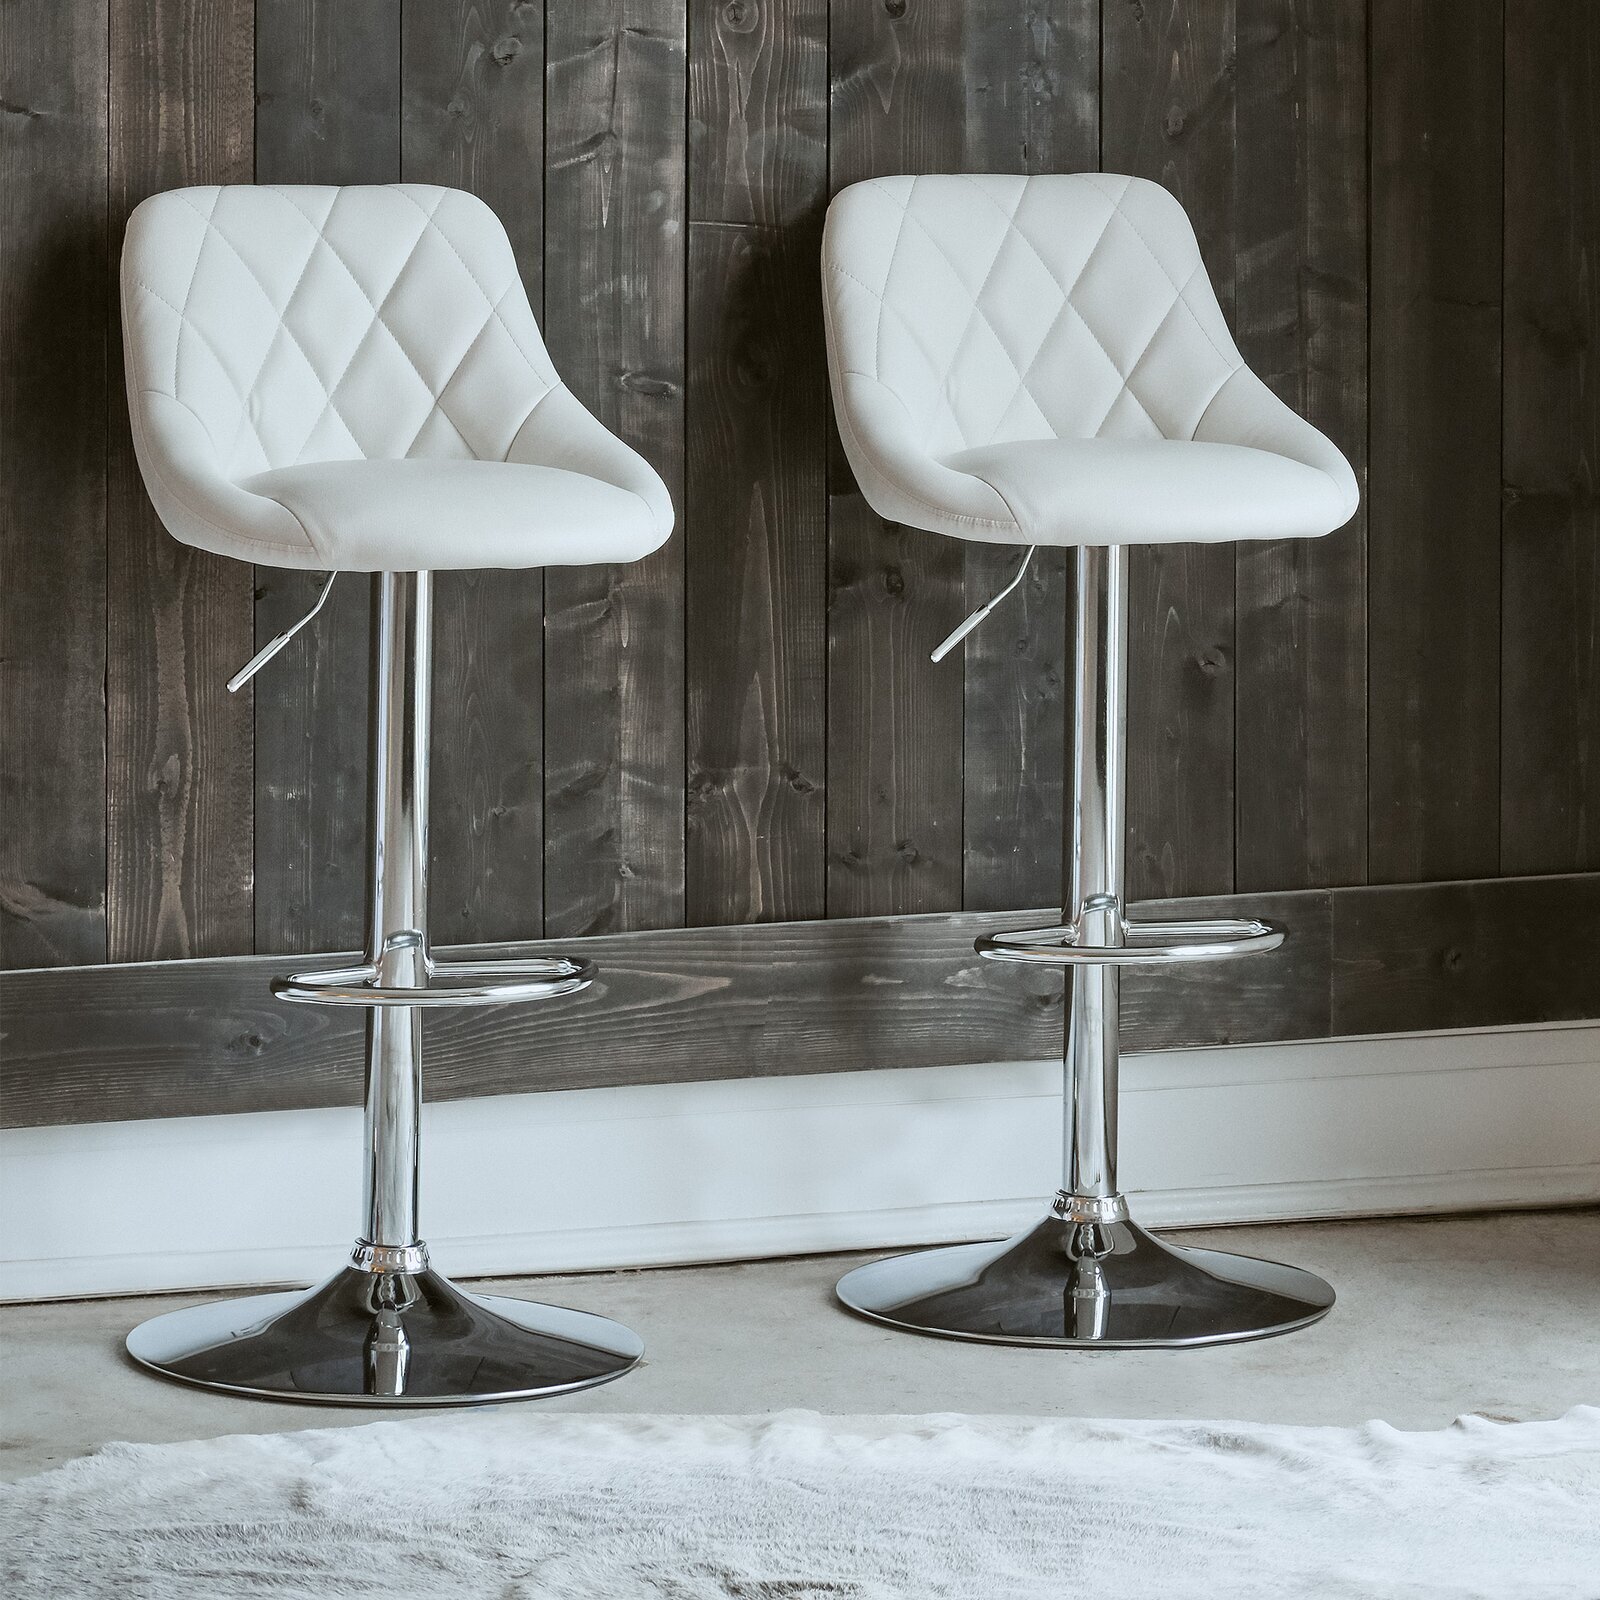 Curved Bar Stools